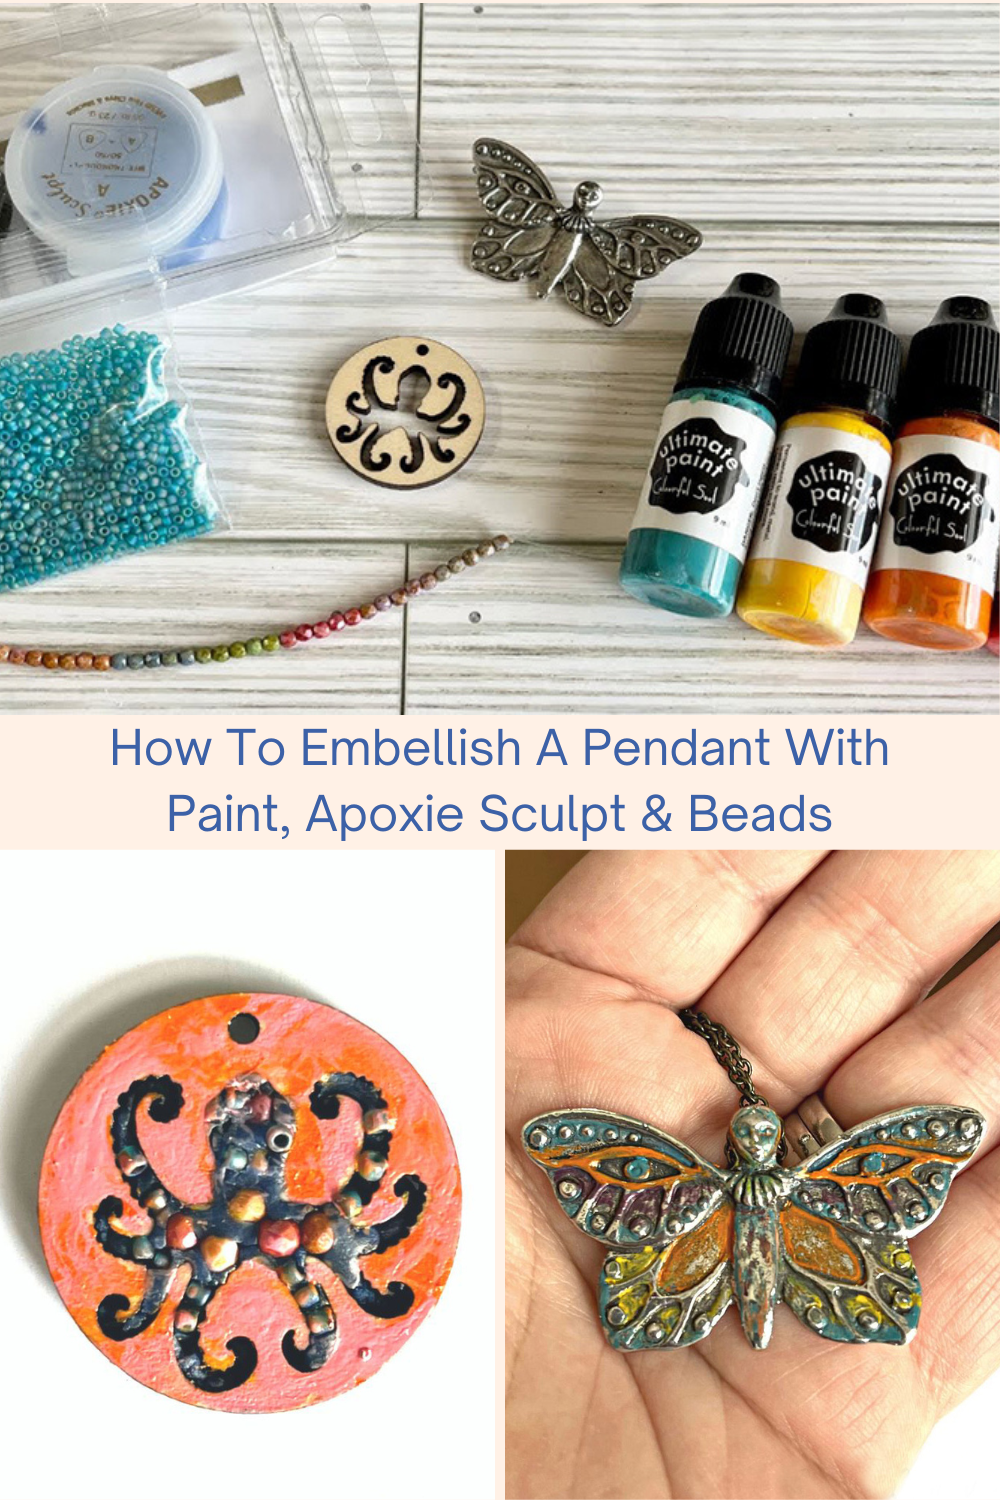 How To Embellish A Pendant With Paint, Apoxie Sculpt & Beads Collage